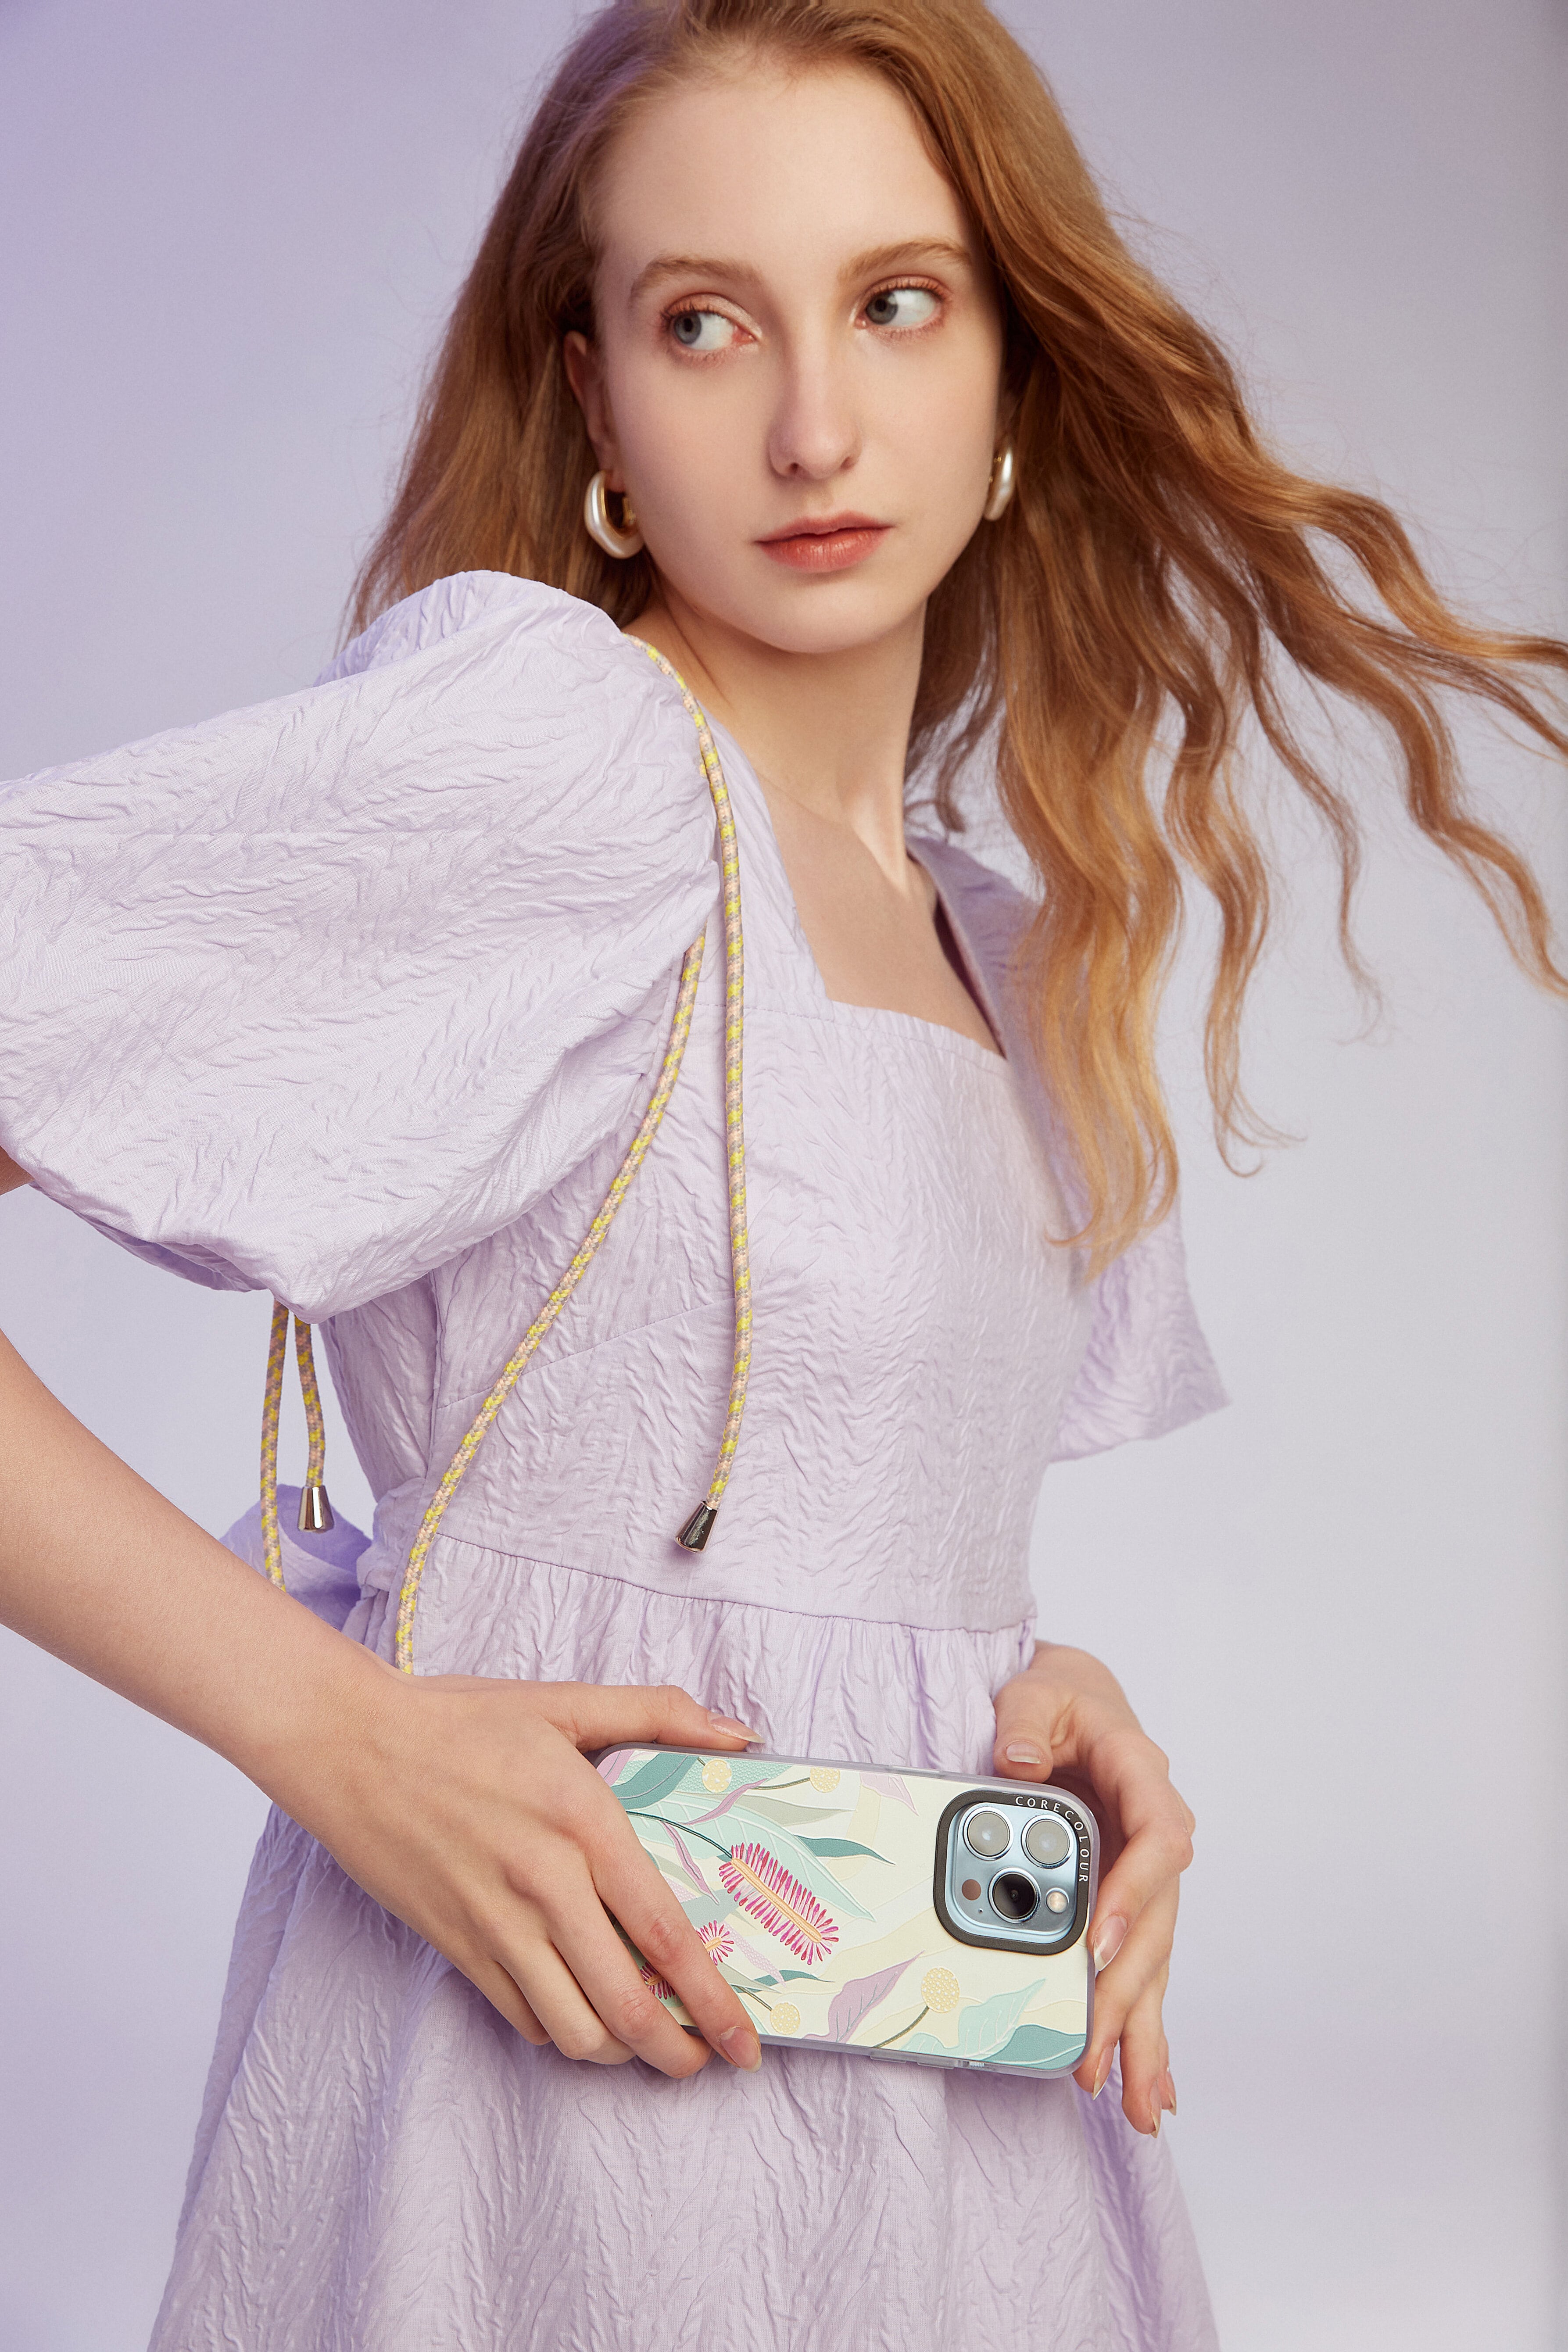 A girl in light pink dress with the stylish phone strap adorned with a yellow and white braided cord